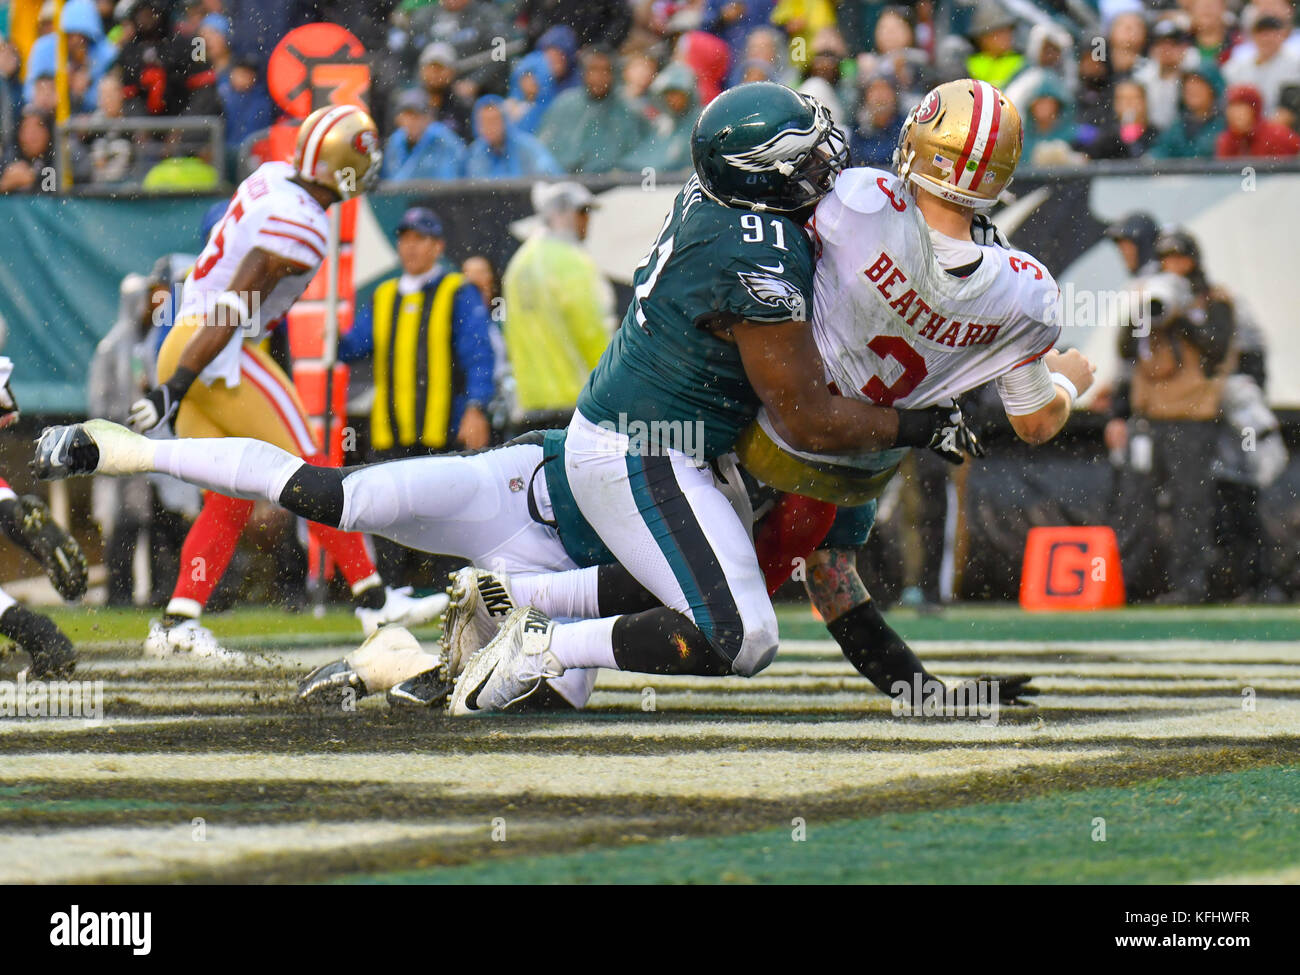 Oct 29, 2017: 49ers quarterback C.J. Beathard (3) is hit by the Eagles Fletcher Cox (91) as he releases a pass during a game at Lincoln Financial Field in Philadelphia, Pennsylvania. Gregory Vasil/Cal Sport Media Stock Photo